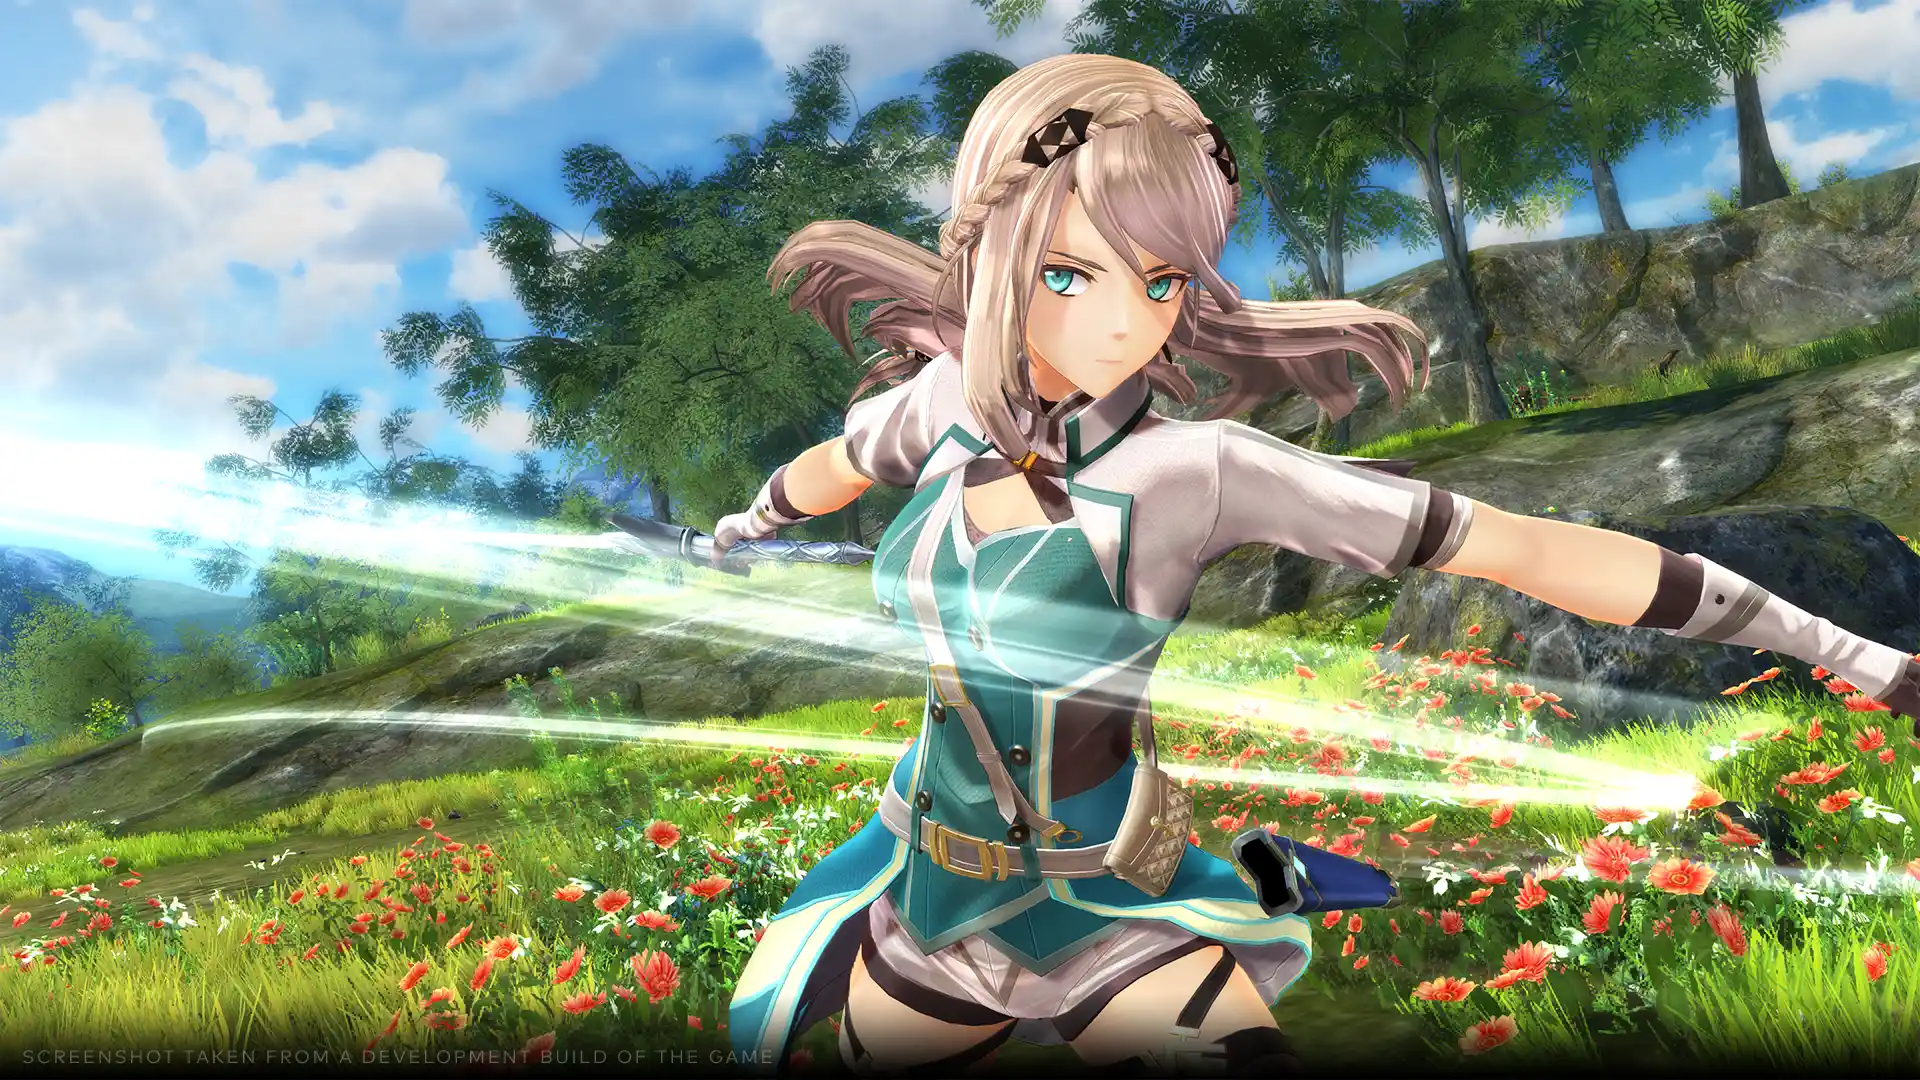 NIS America annuncia The Legend of Heroes: Trails through Daybreak, Trails of Cold Steel III e IV in arrivo su PS5